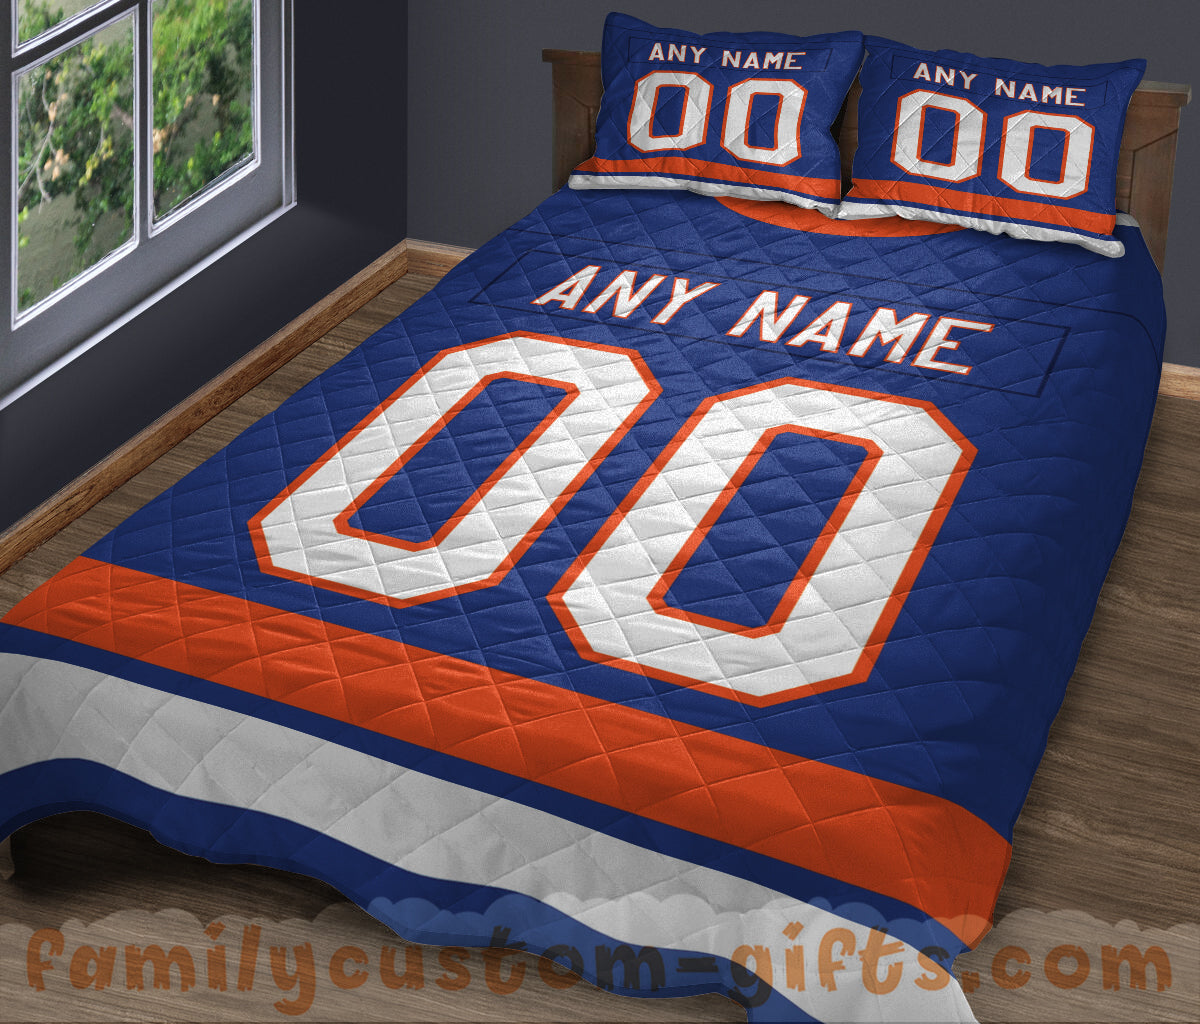 Custom Quilt Sets New York Jersey Personalized Ice hockey Premium Quilt Bedding for Men Women